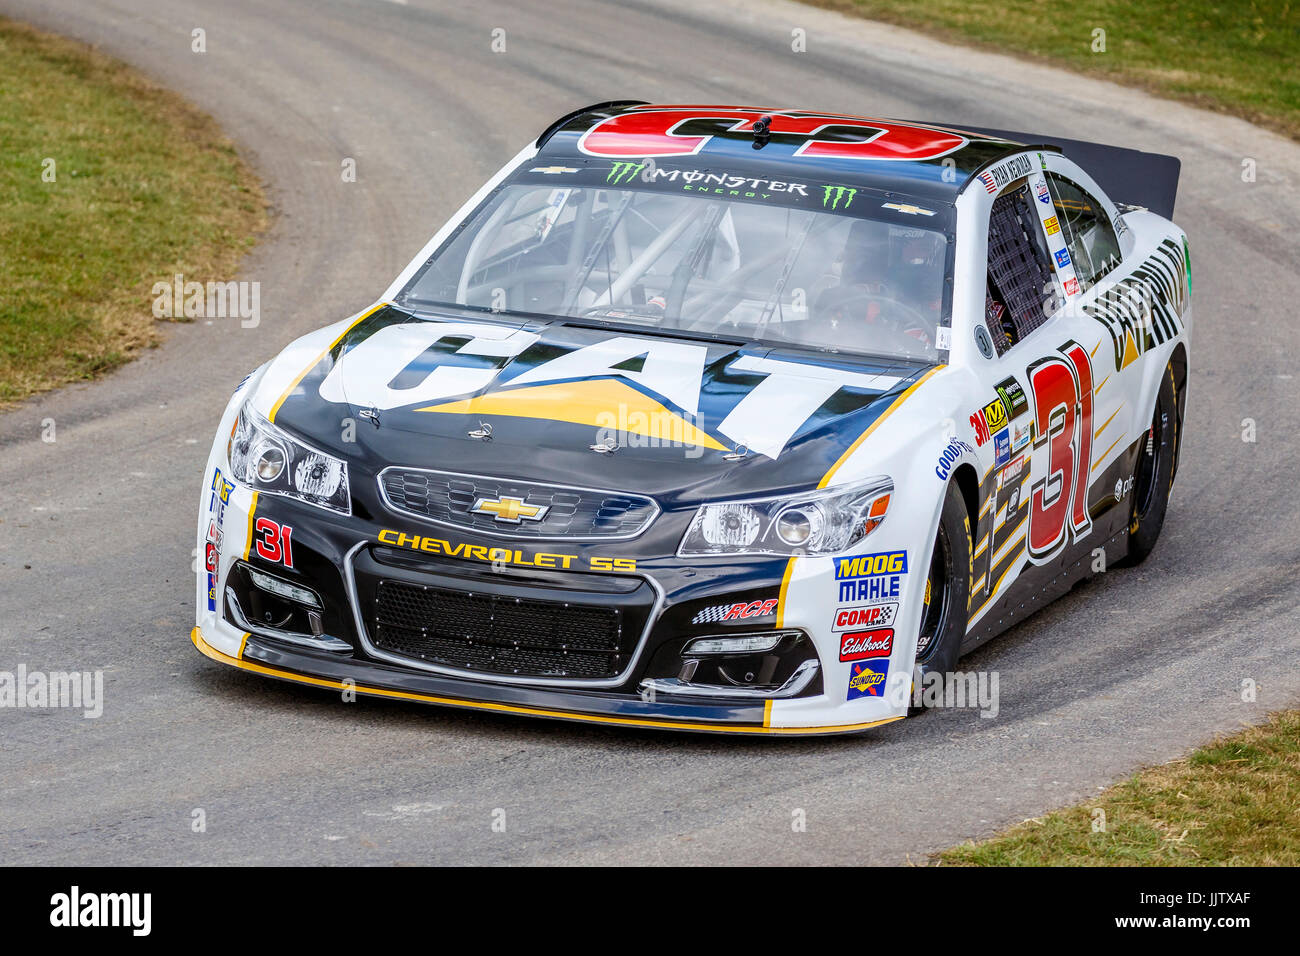 2017 Chevrolet SS NASCAR with driver Brian Vickers at the 2017 Goodwood Festival of Speed, Sussex, UK. Stock Photo